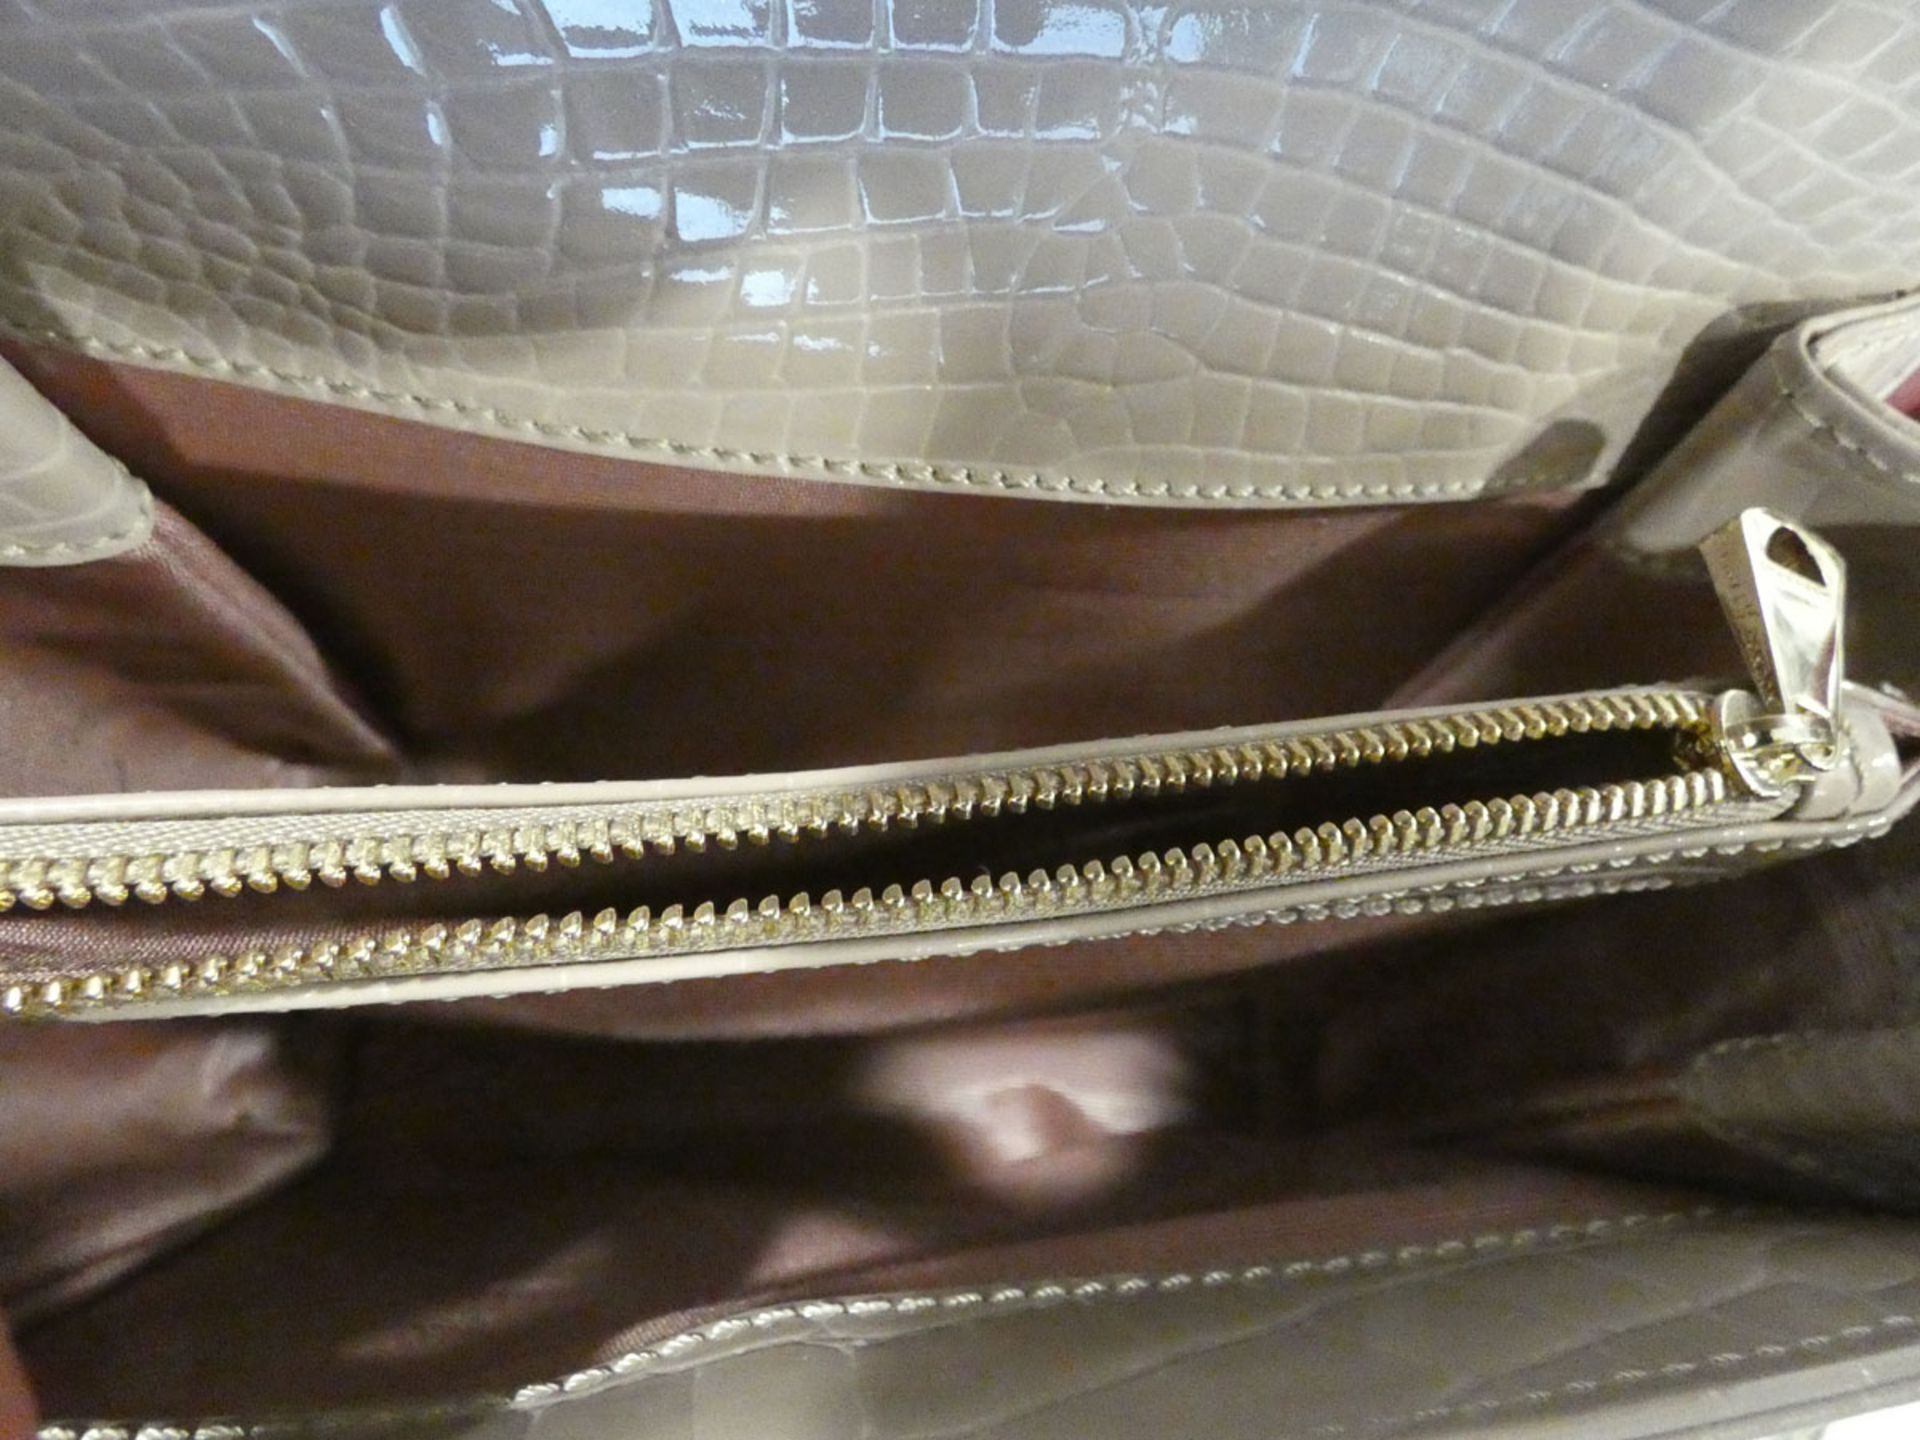 Aspinal of London Midi Mock Croc Bag in beige and red - Image 6 of 8